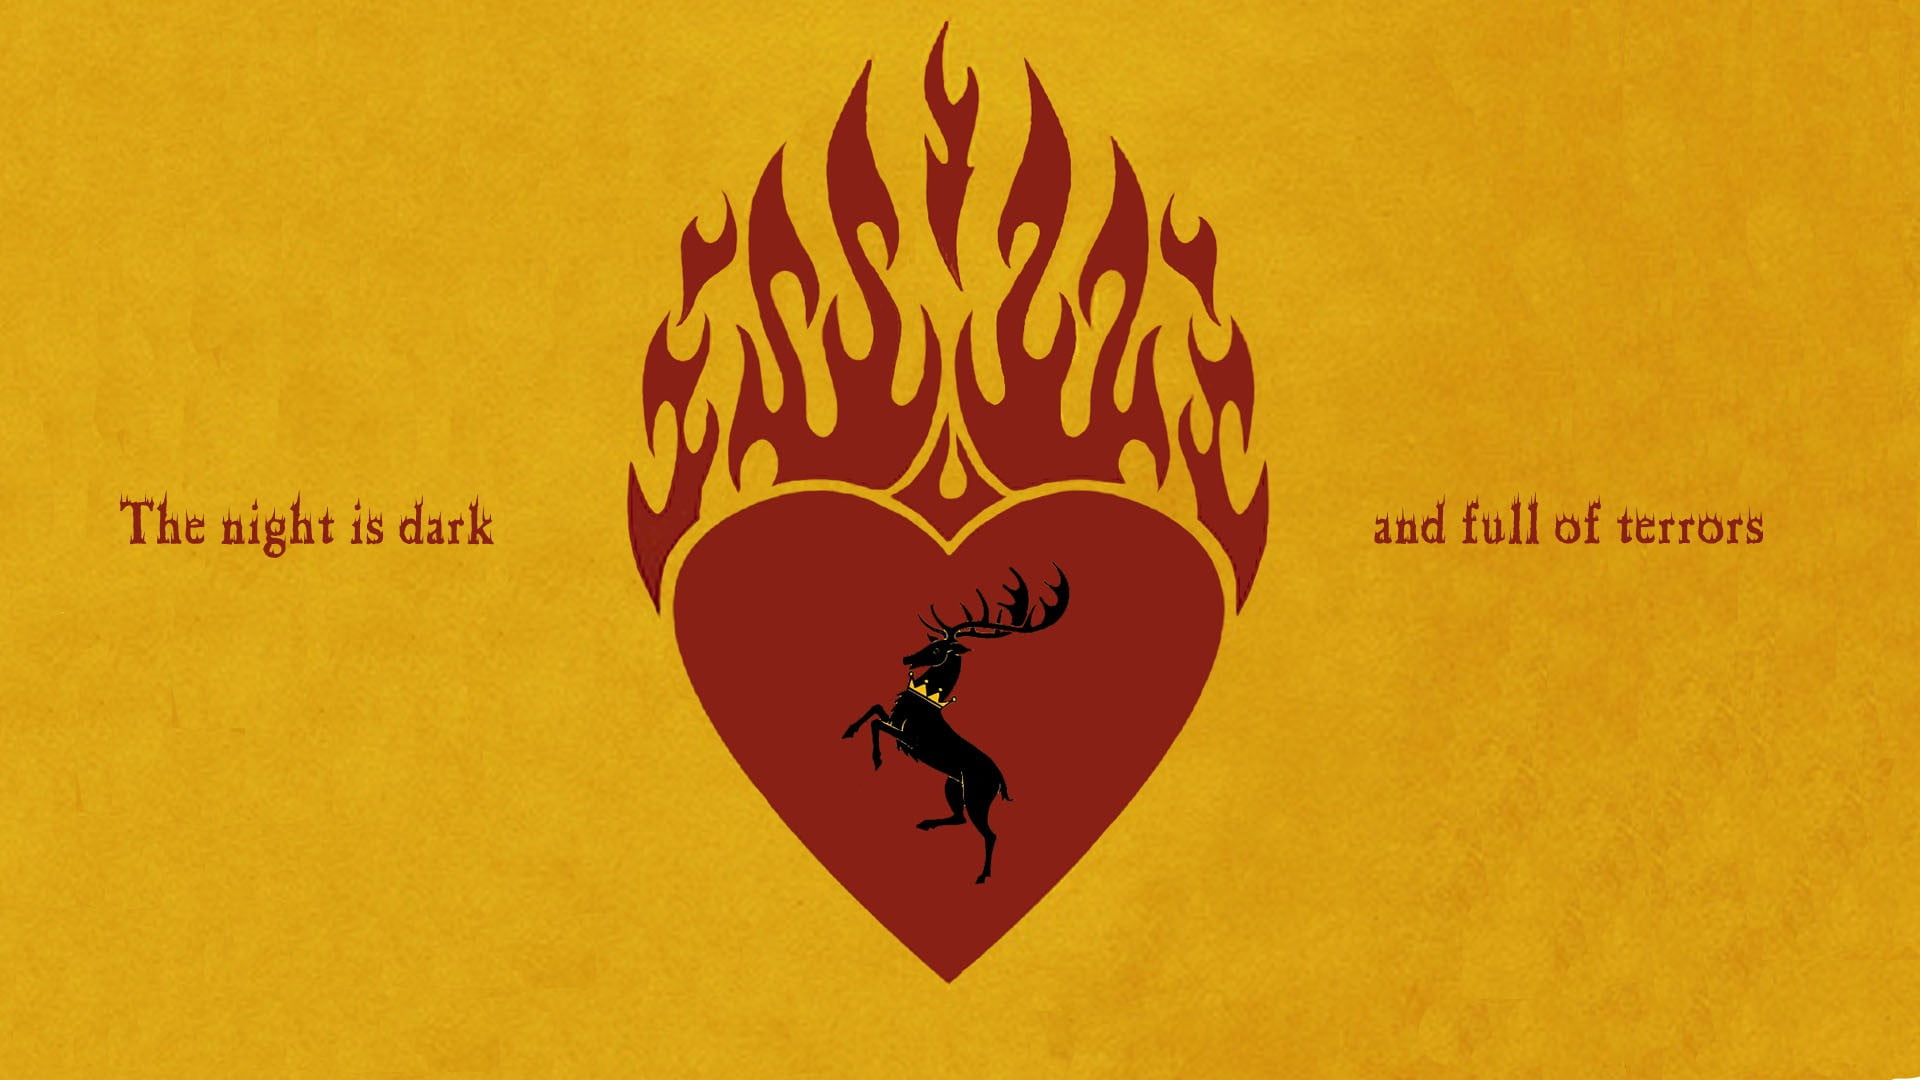 The Night is dark logo, Game of Thrones, text, yellow, communication